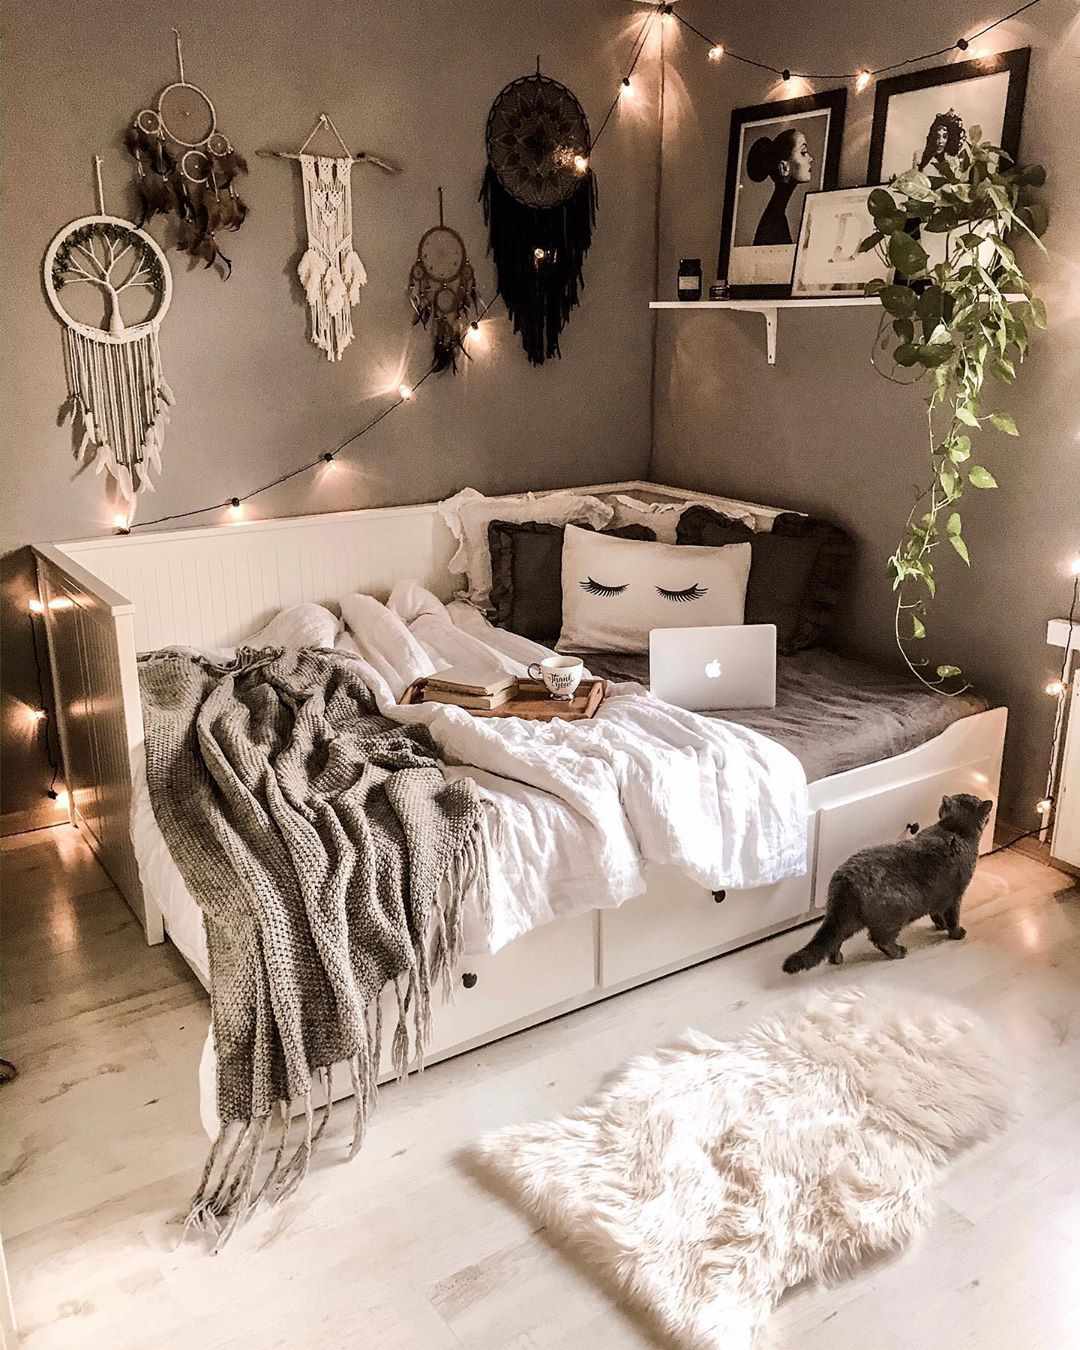 Bedroom with cafe light s